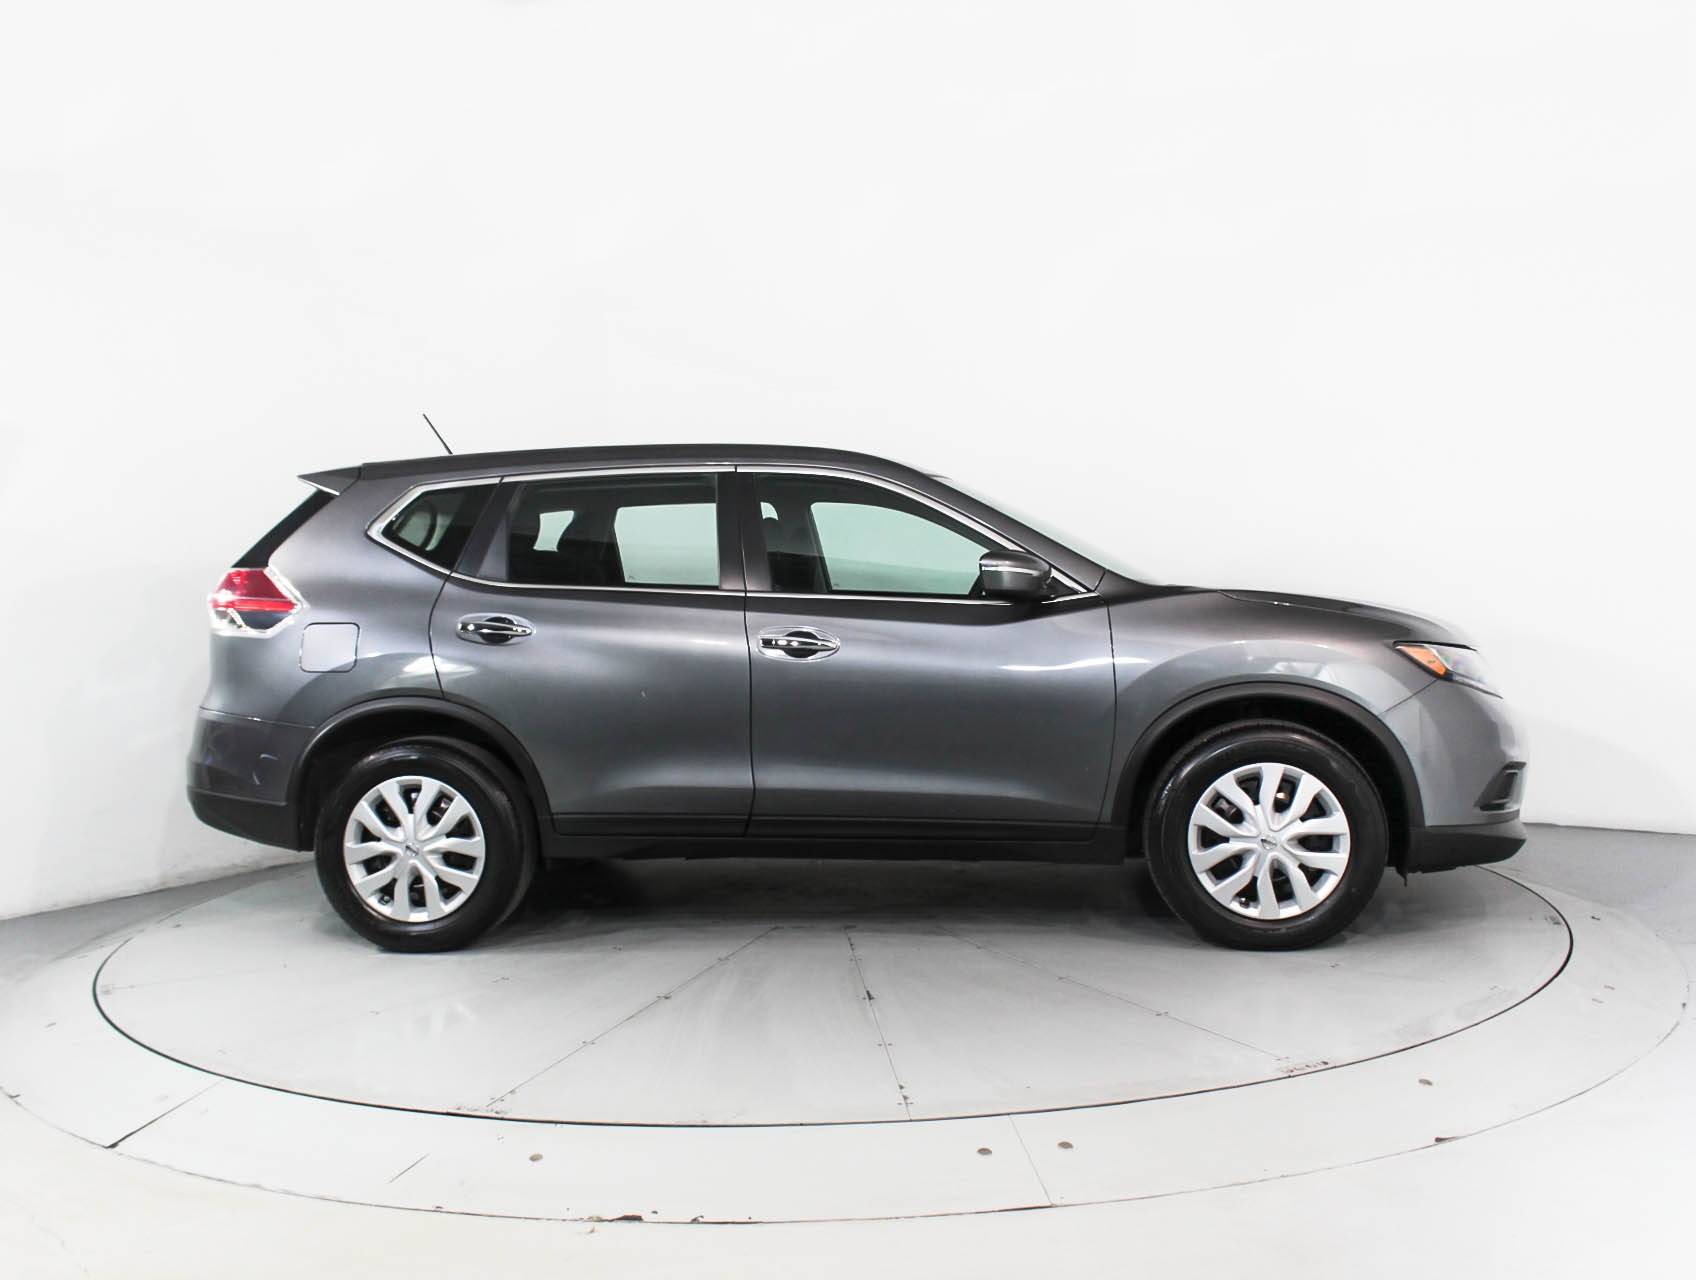 Florida Fine Cars - Used NISSAN ROGUE 2015 MARGATE S